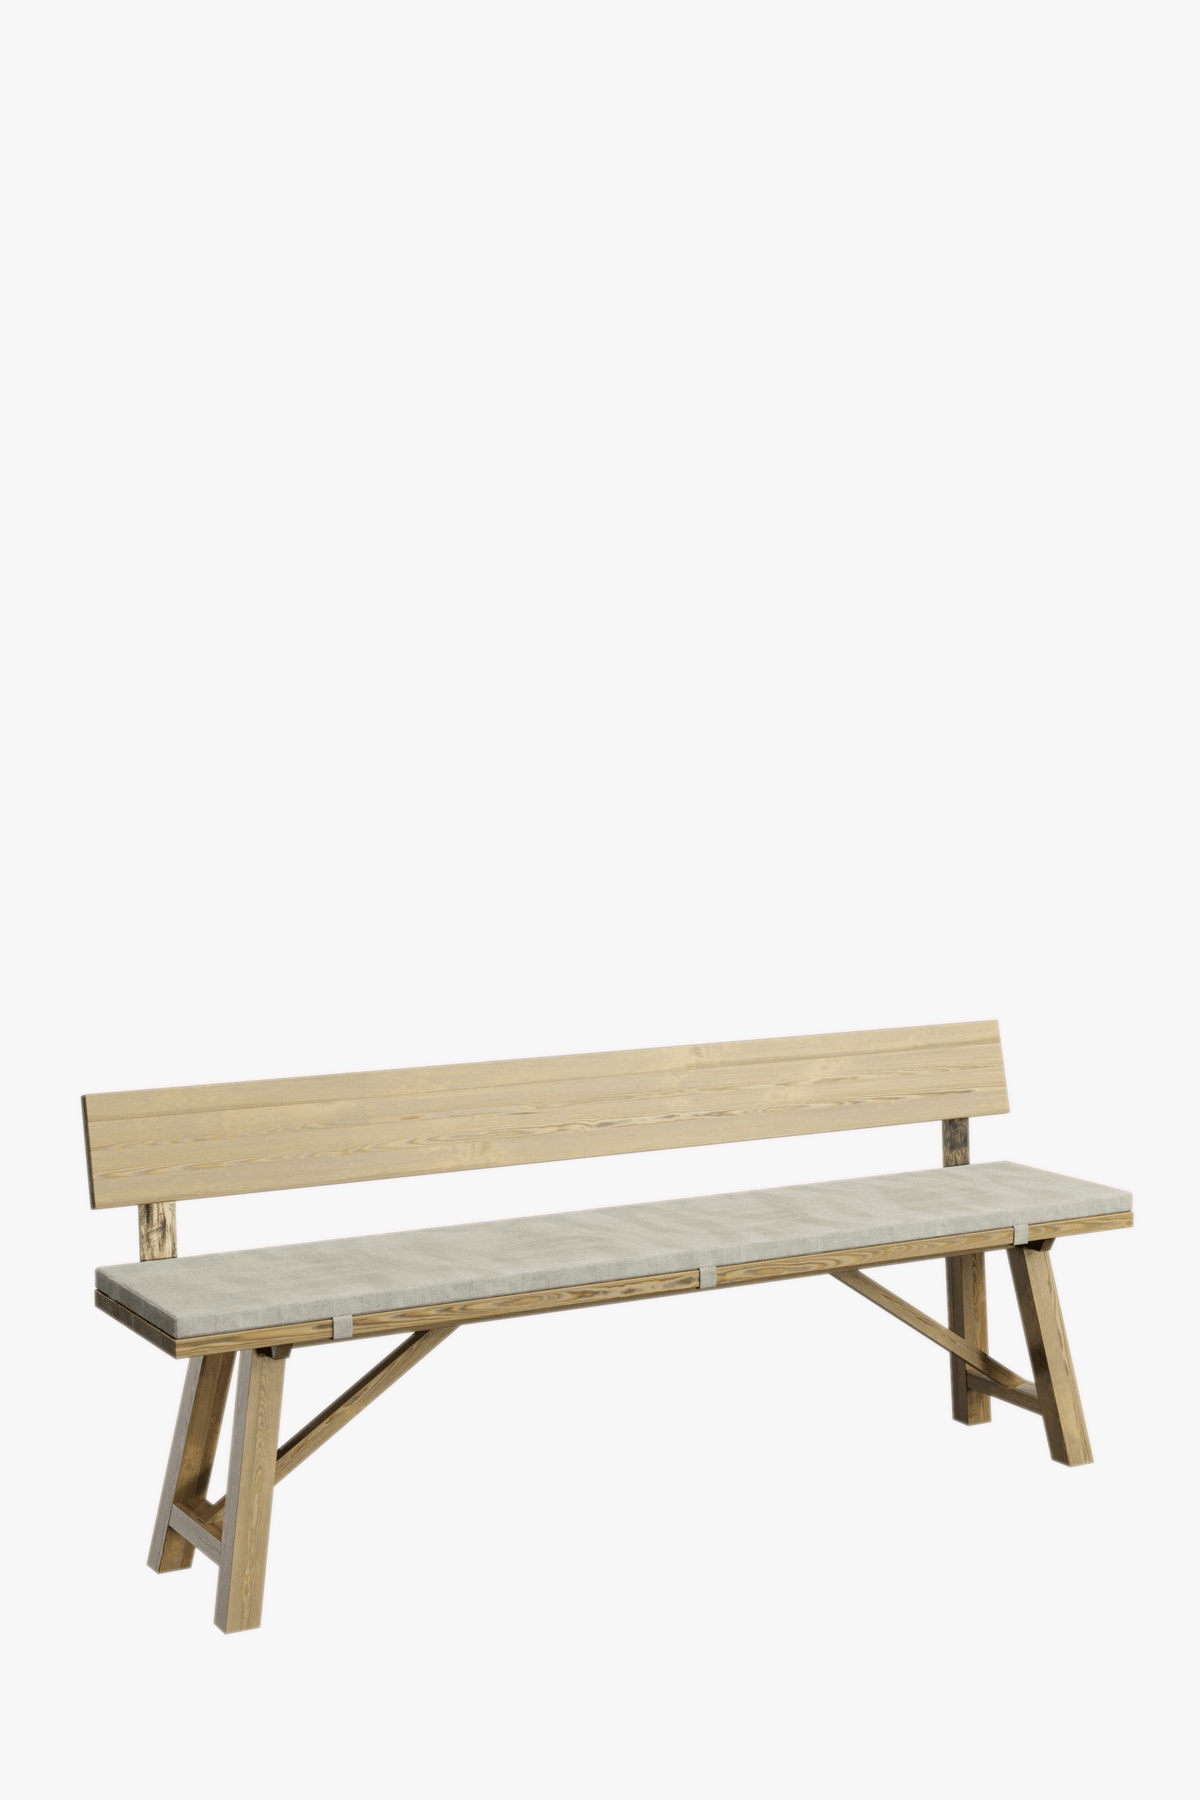 Merrion Cushion for Dining Bench